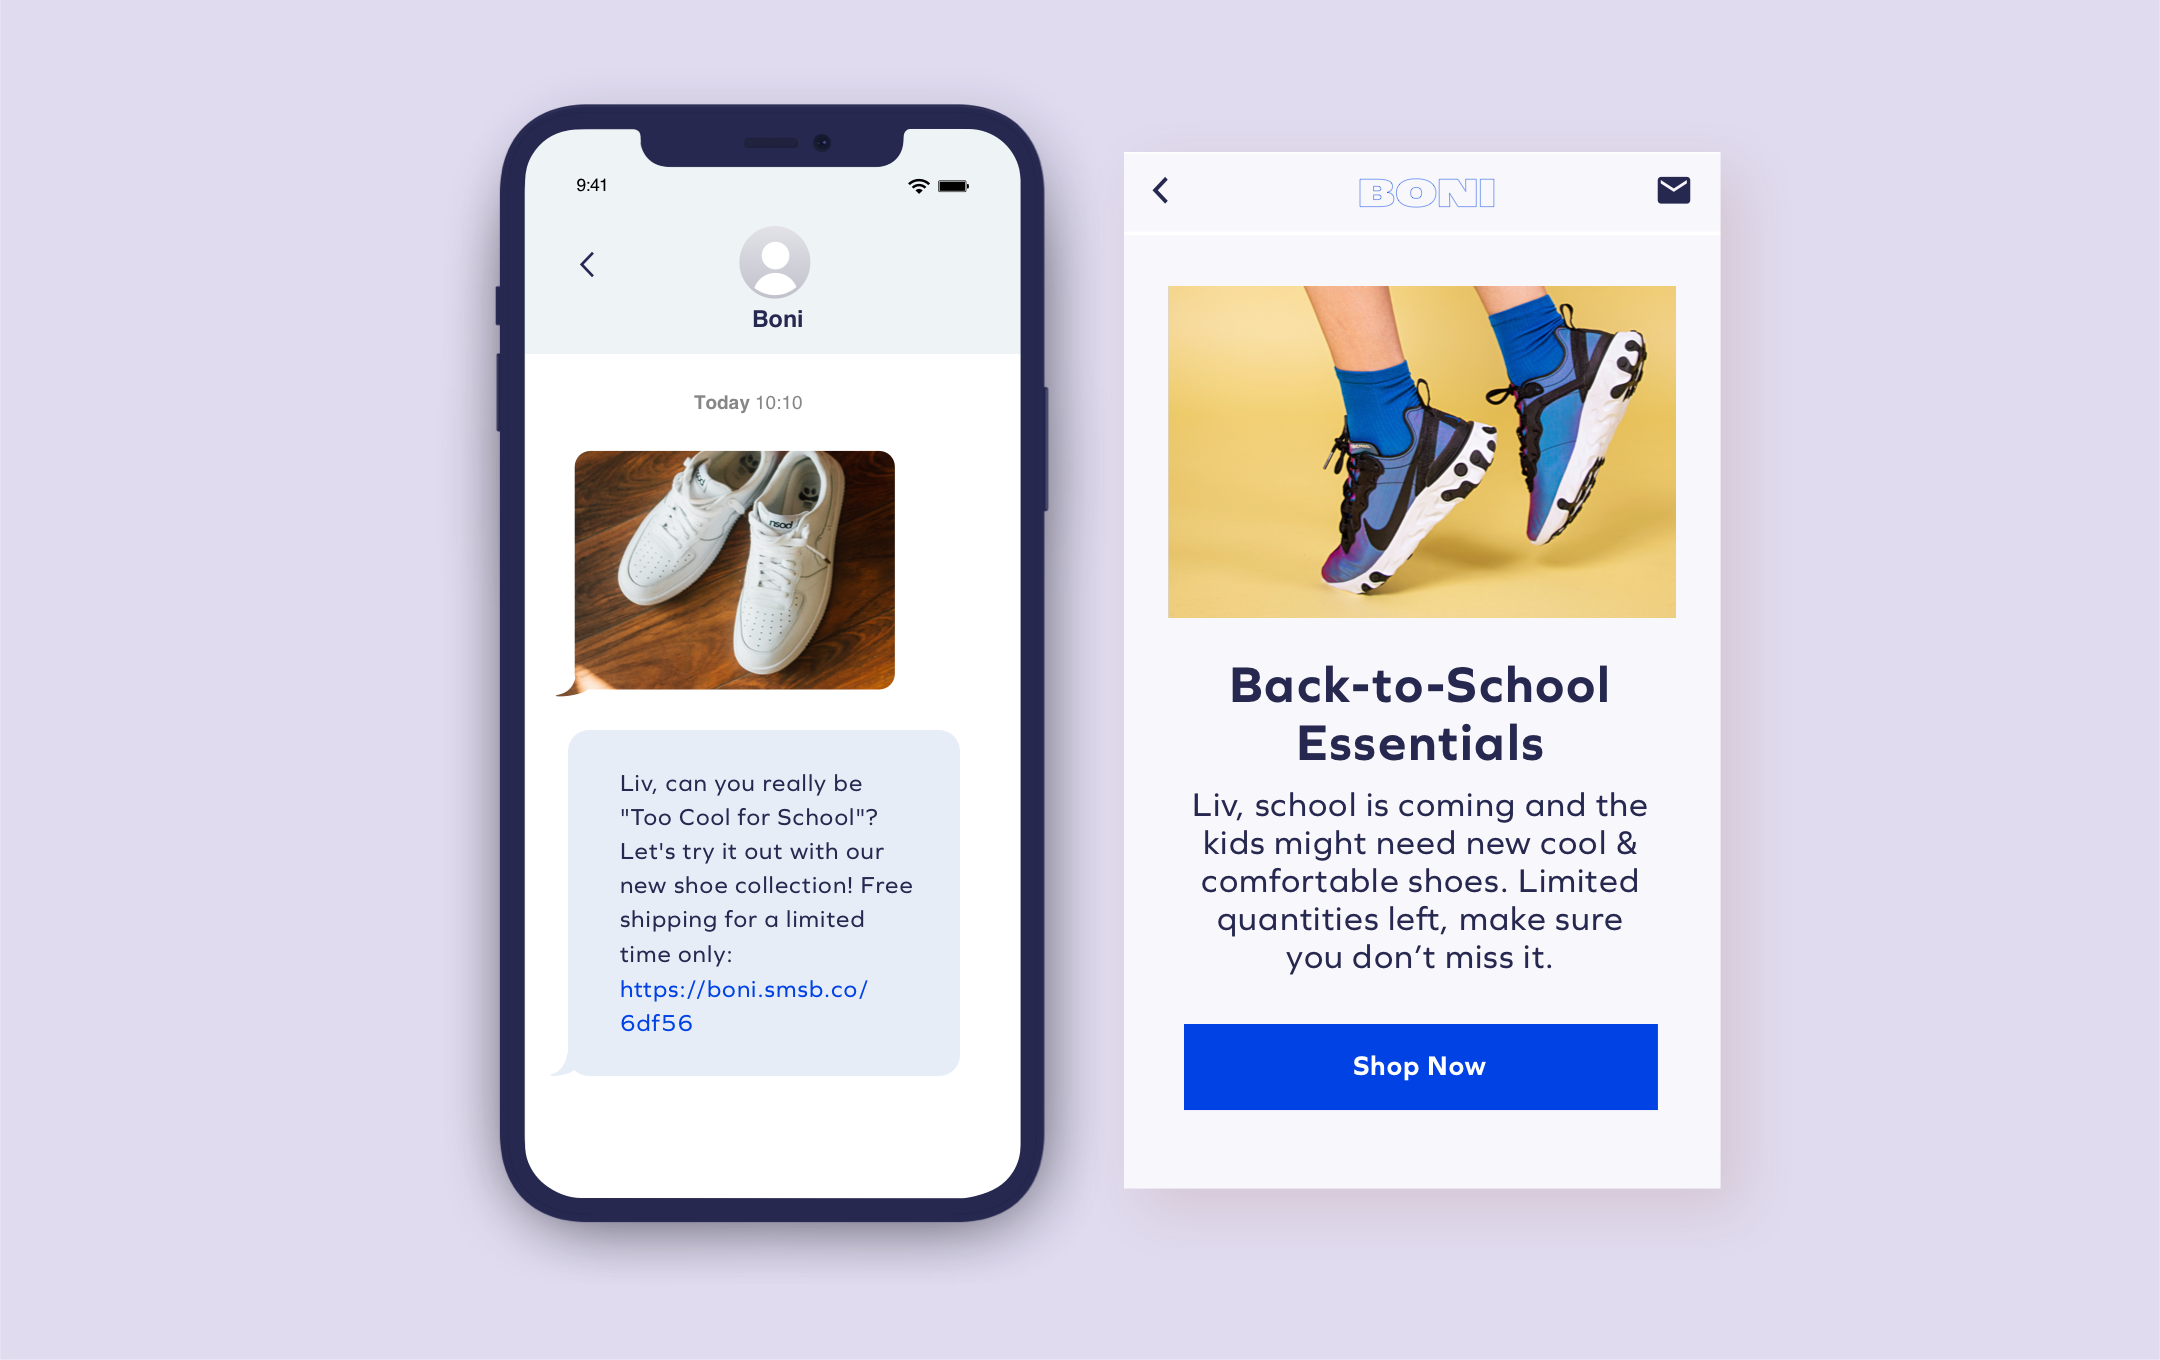 Back-to-School SMS & Email marketing